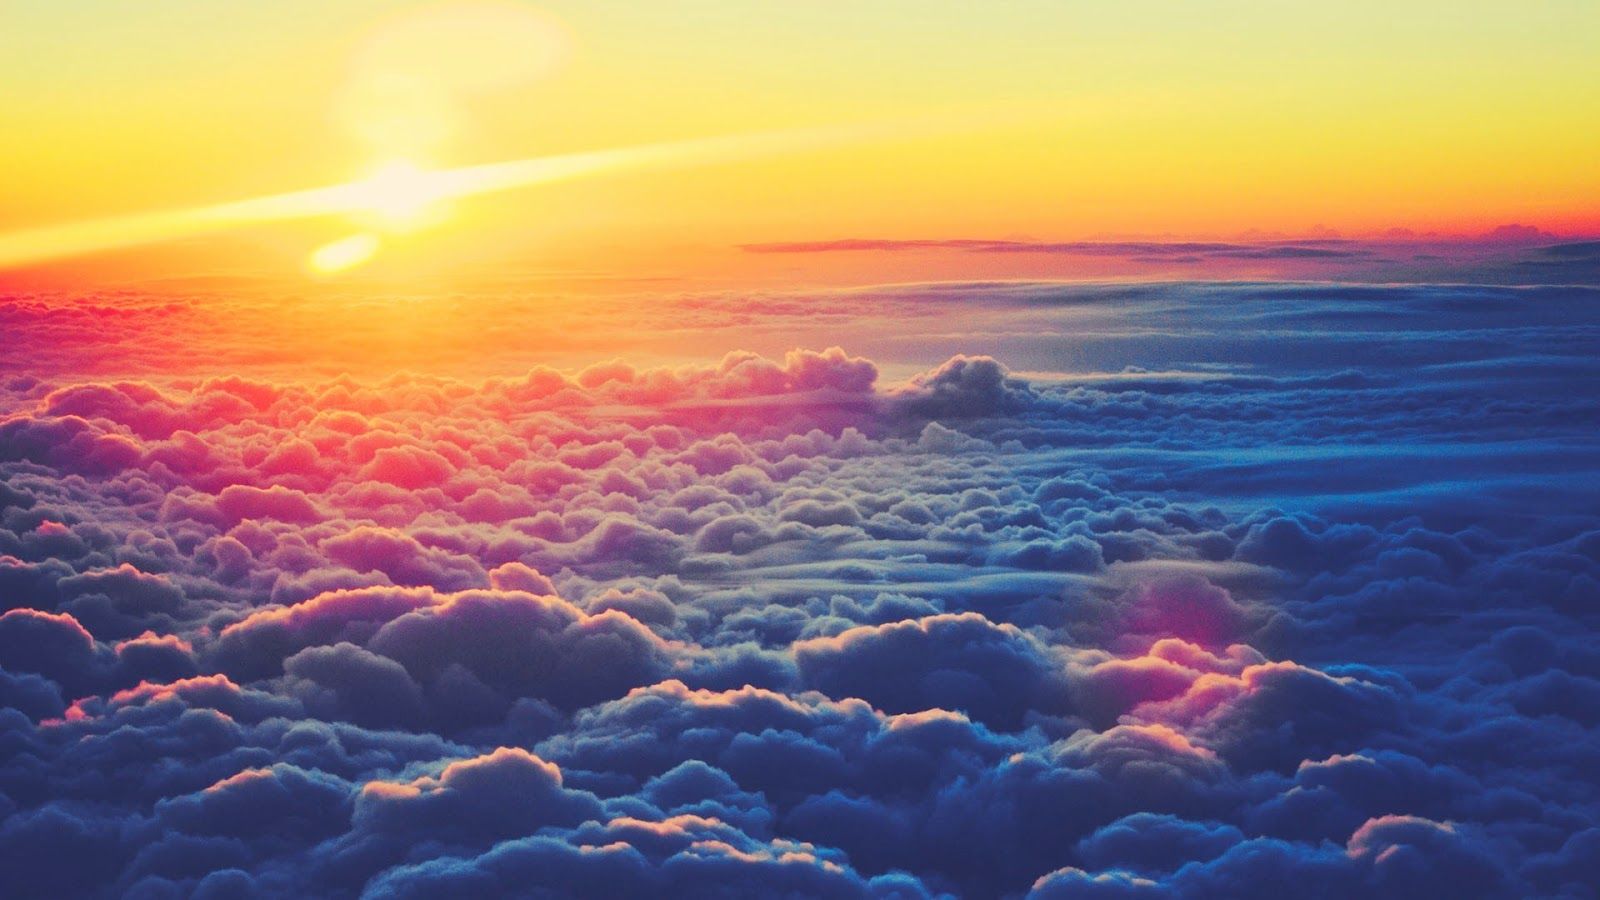 Above the Clouds Sunset Computer Wallpaper